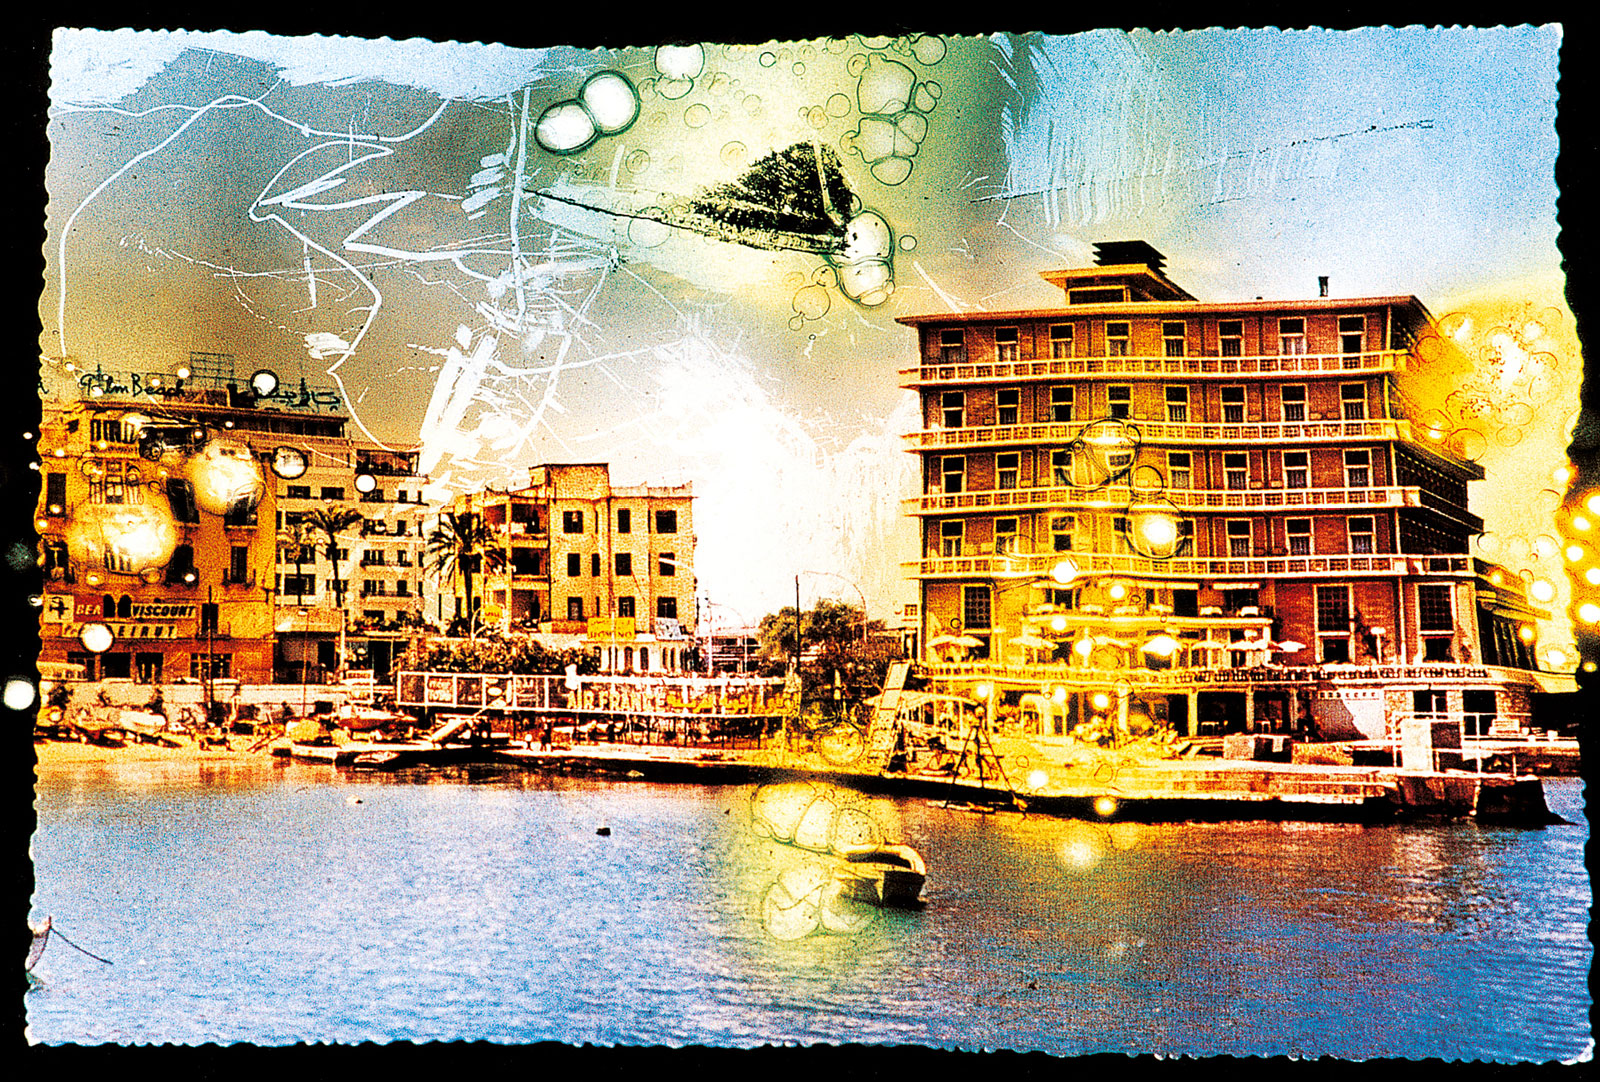 A postcard made from a singed negative by photographer Abdallah Farah depicting Beirut's St. Georges Hotel, titled 